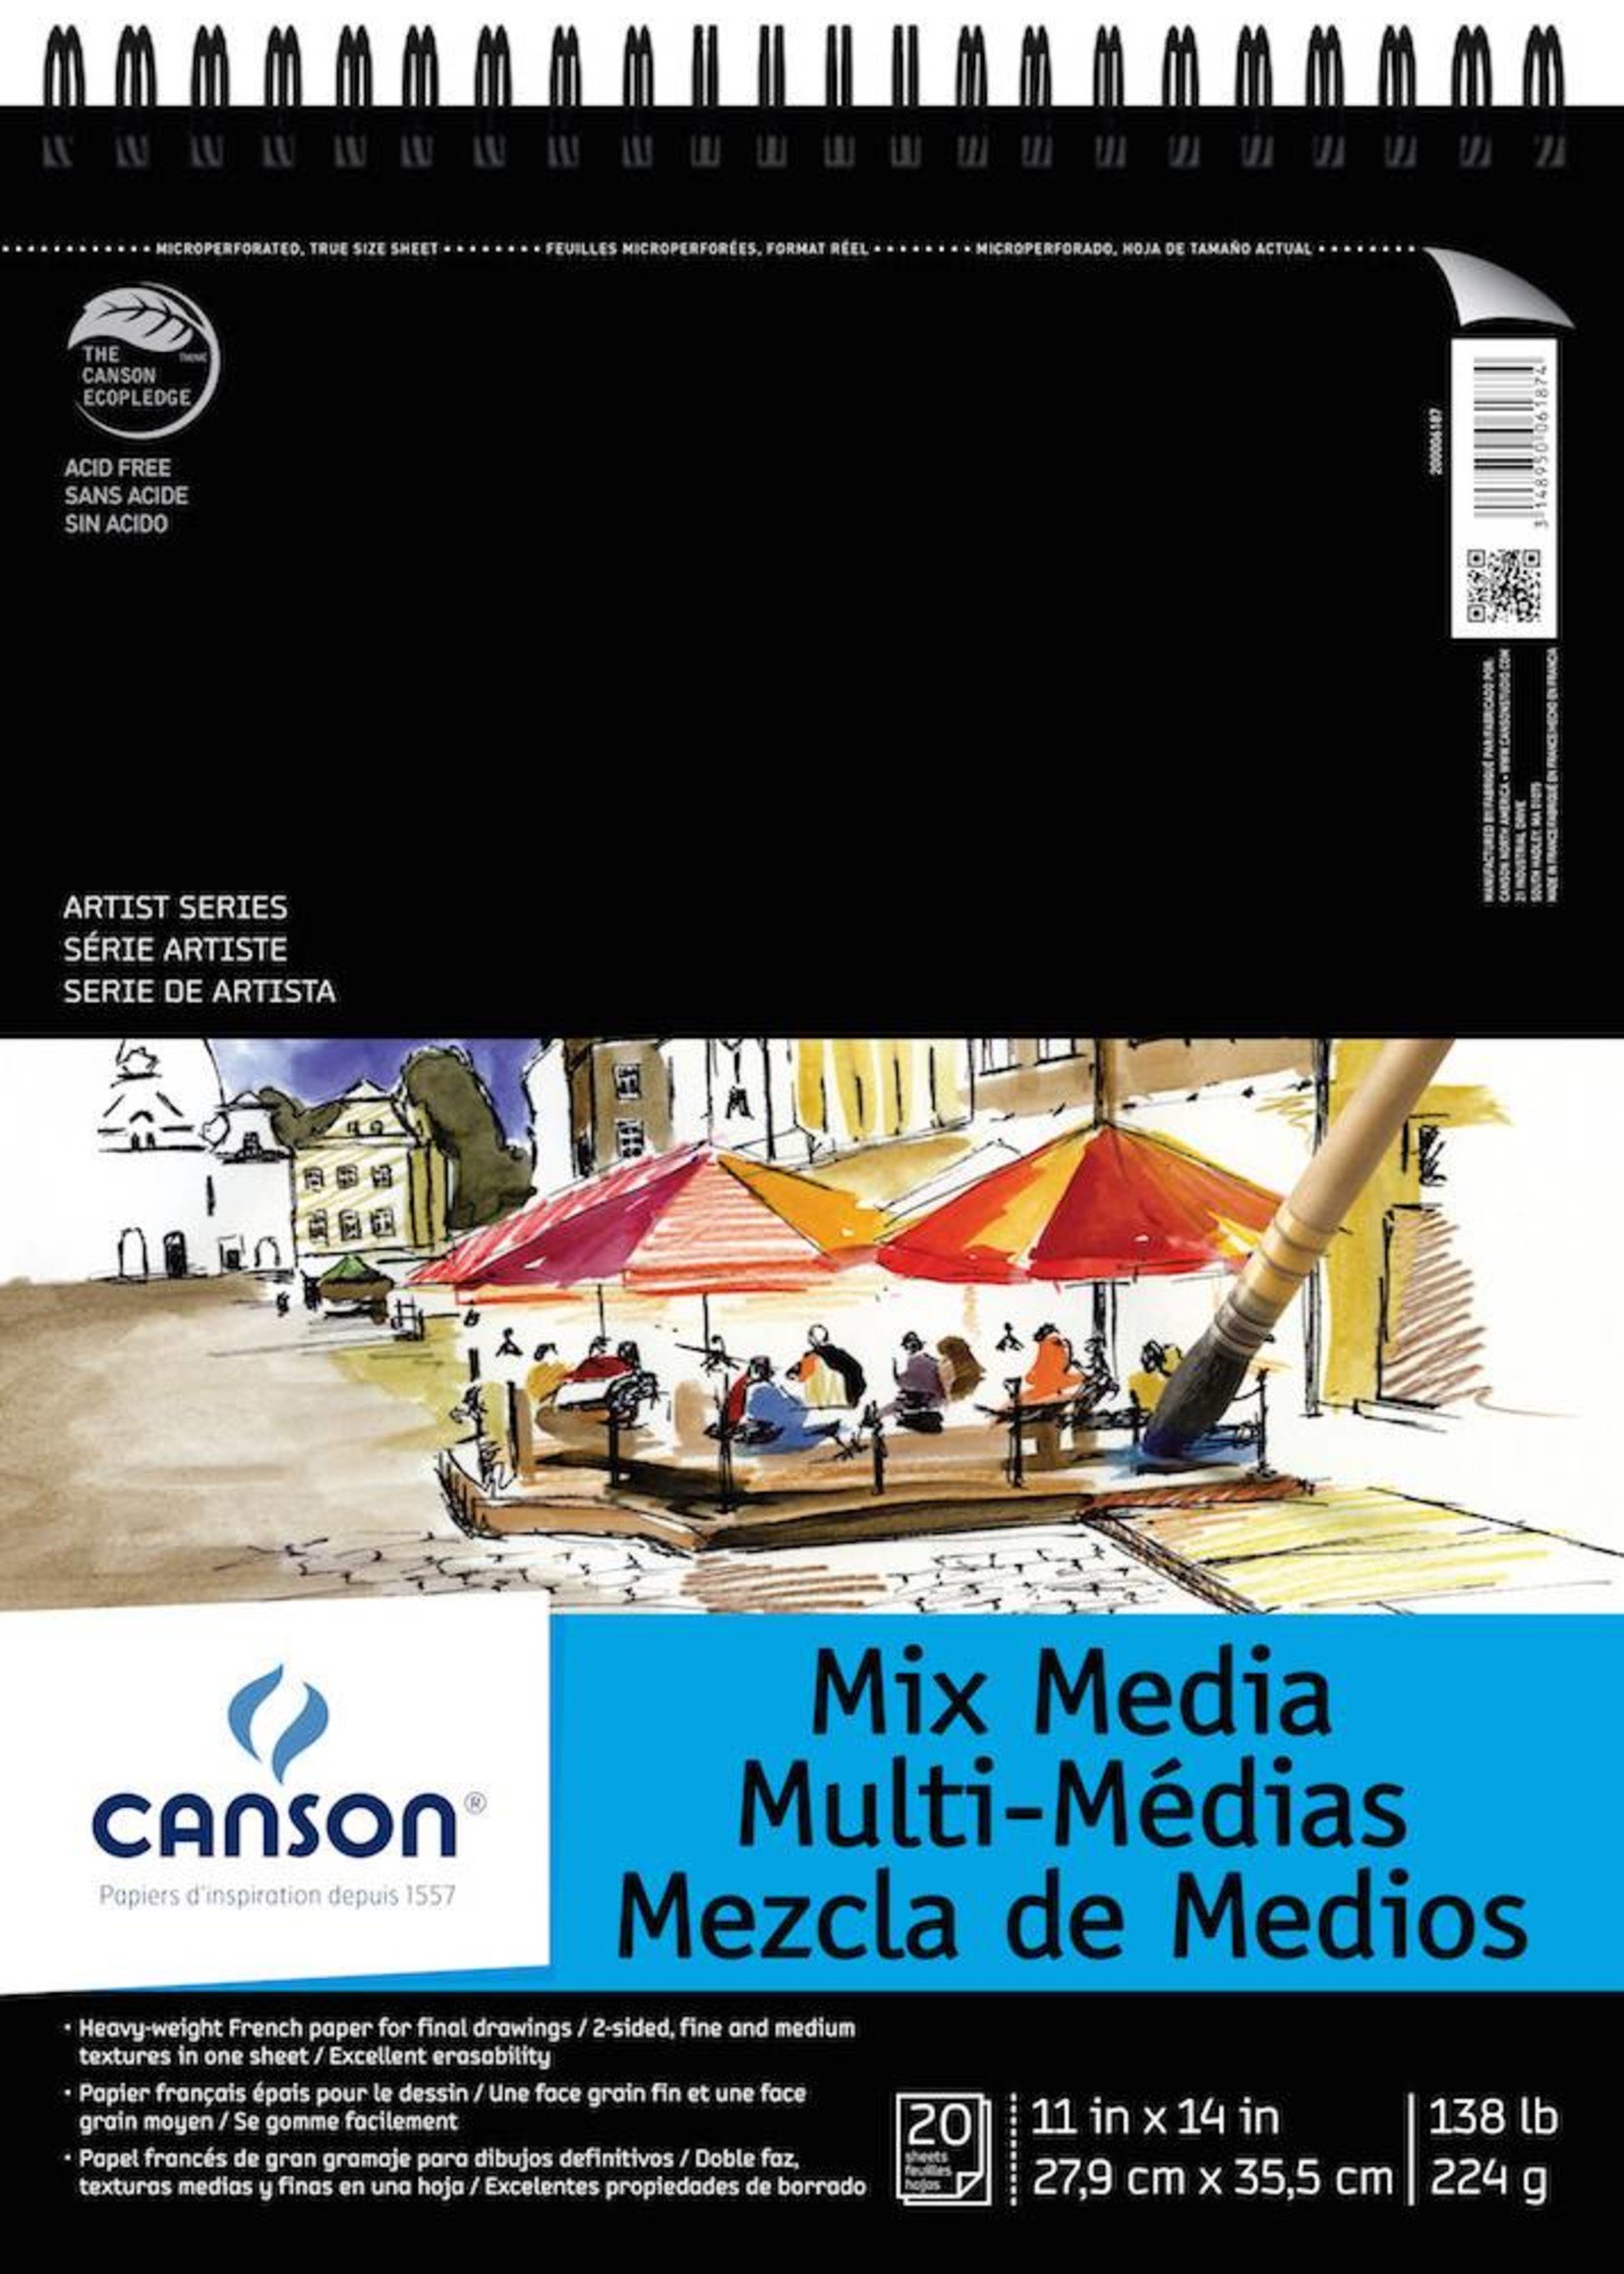 CANSON CANSON ARTIST SERIES MIX MEDIA PAD 11X14 138LB TOP COIL  20/SHT    CAN-200006187